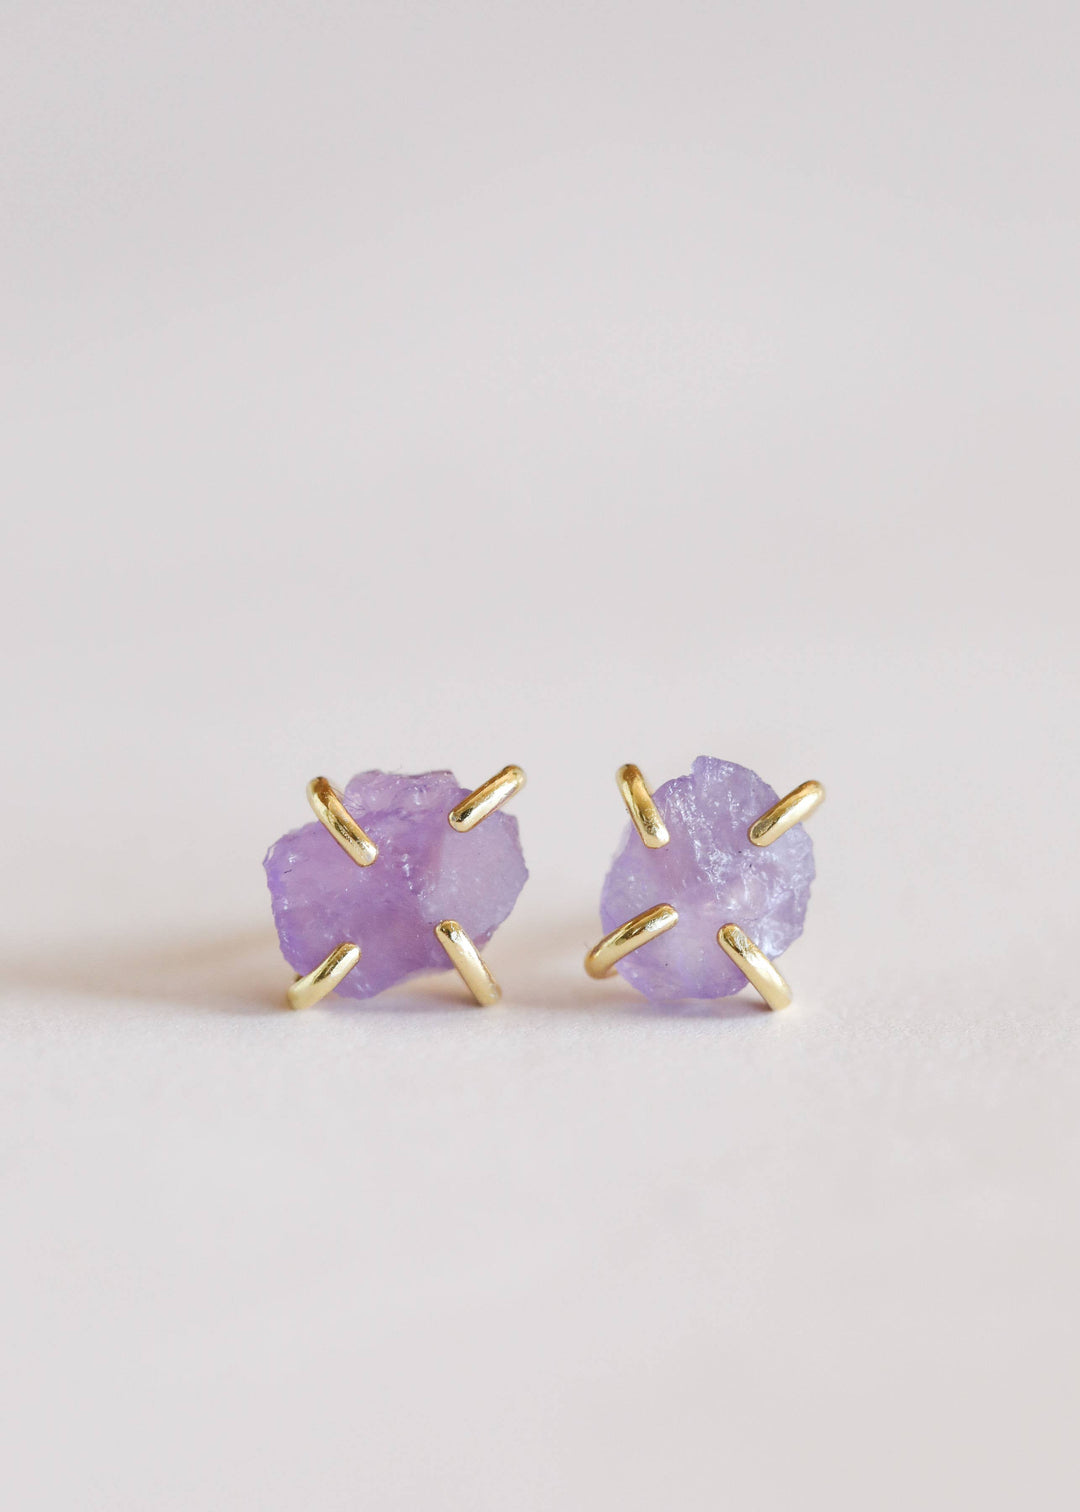 JaxKelly - Amethyst Gemstone Prong Earrings / EQUATION Boutique